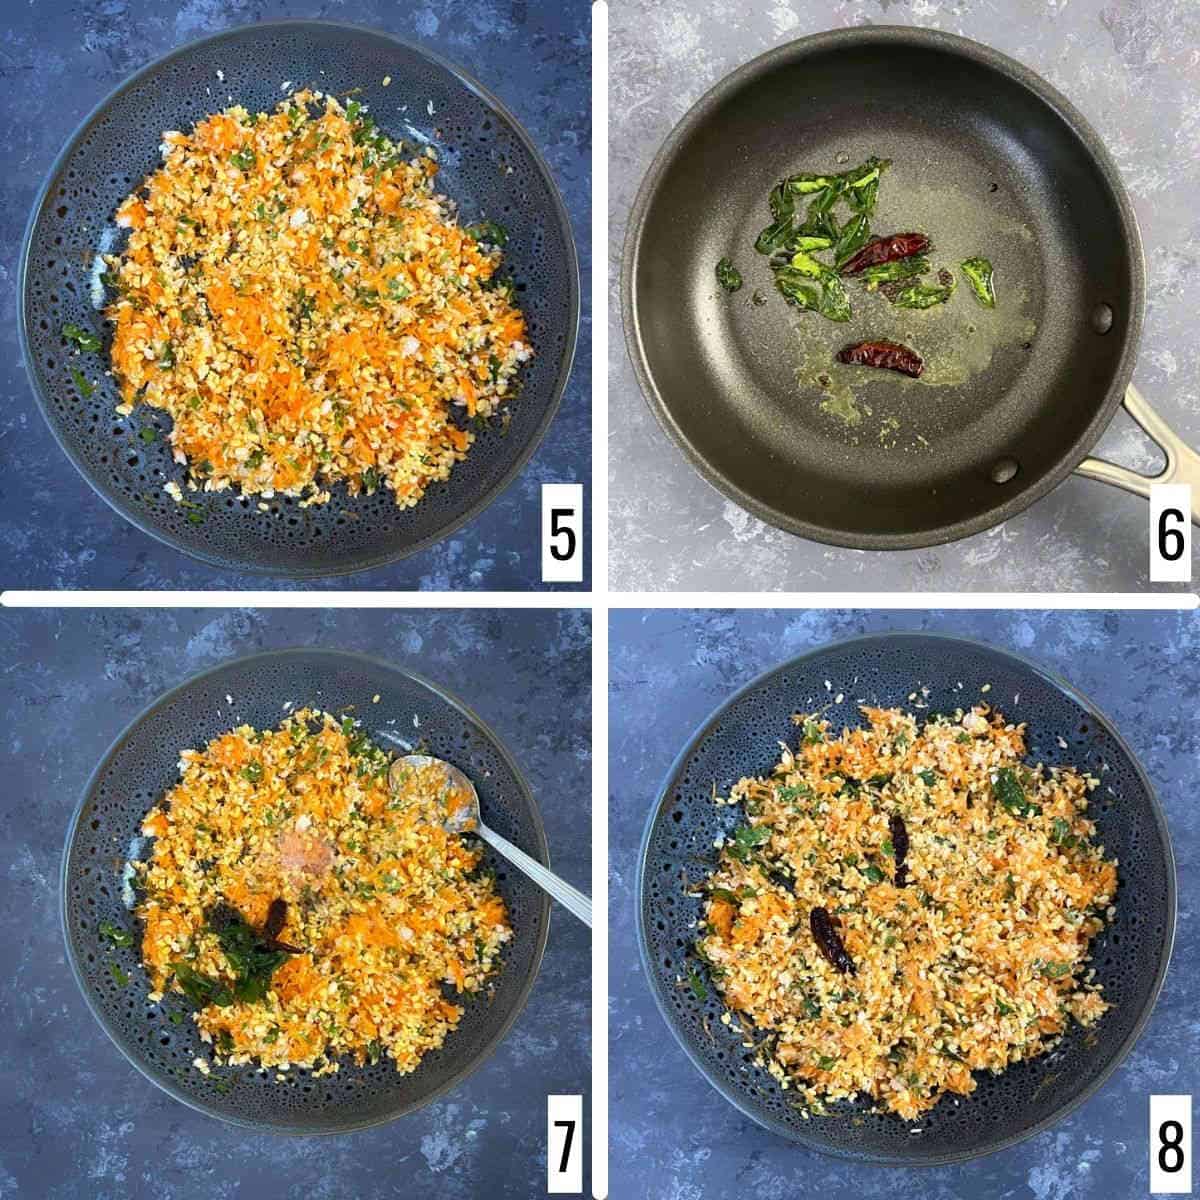 A 4-step collage showing how to make the tempering and combine it with the kosambari salad.